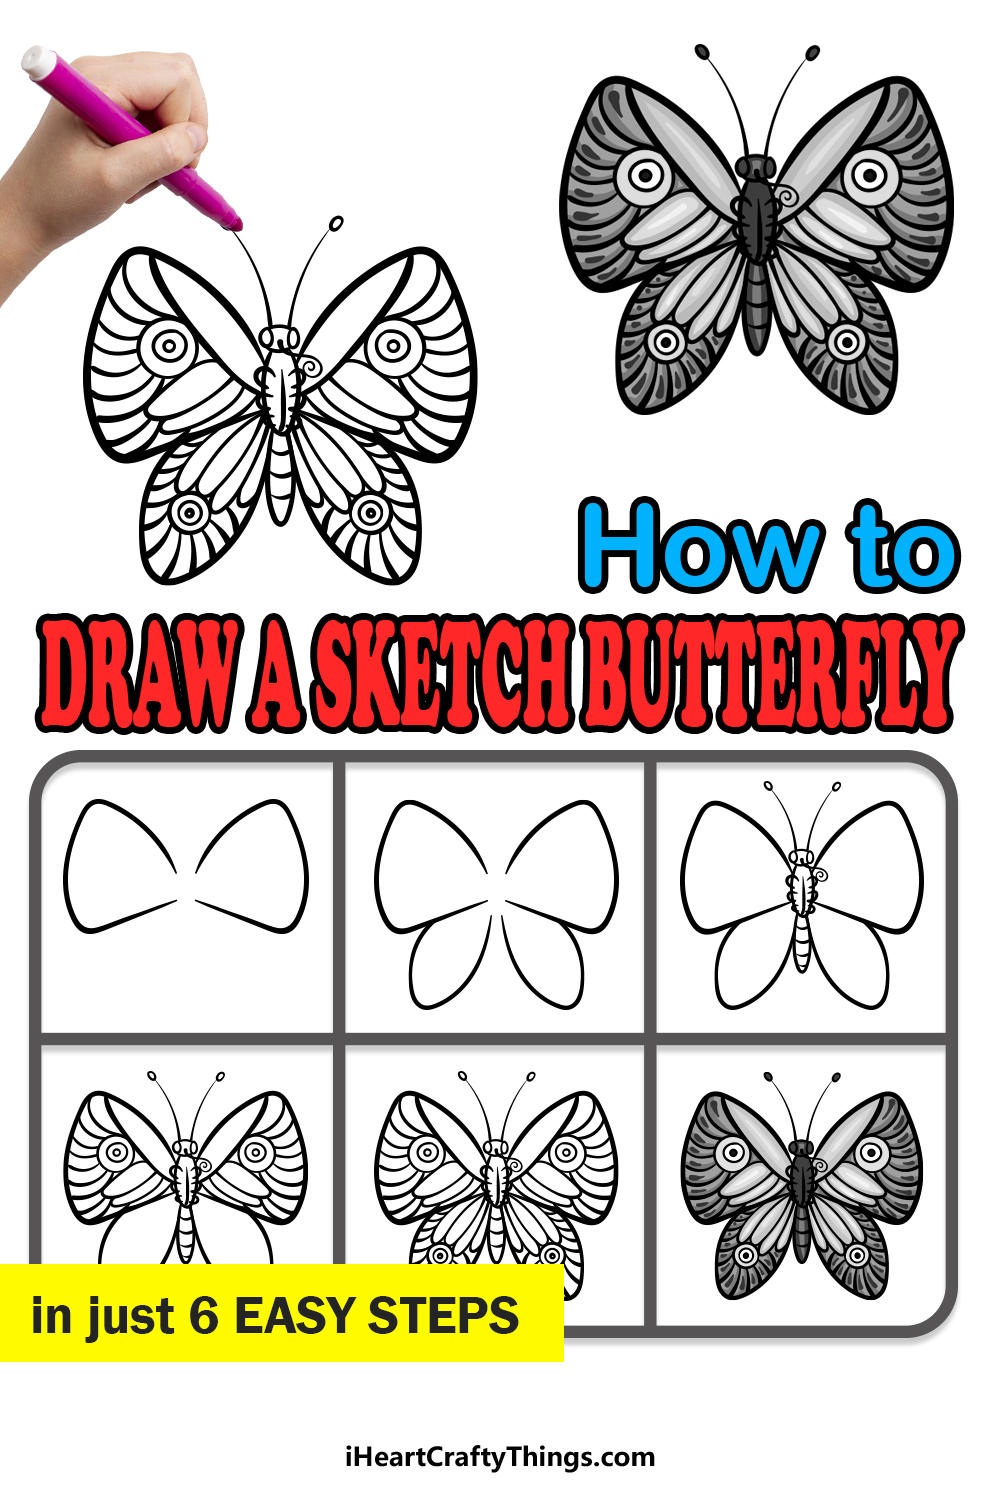 how to draw a Sketch Butterfly in 6 easy steps